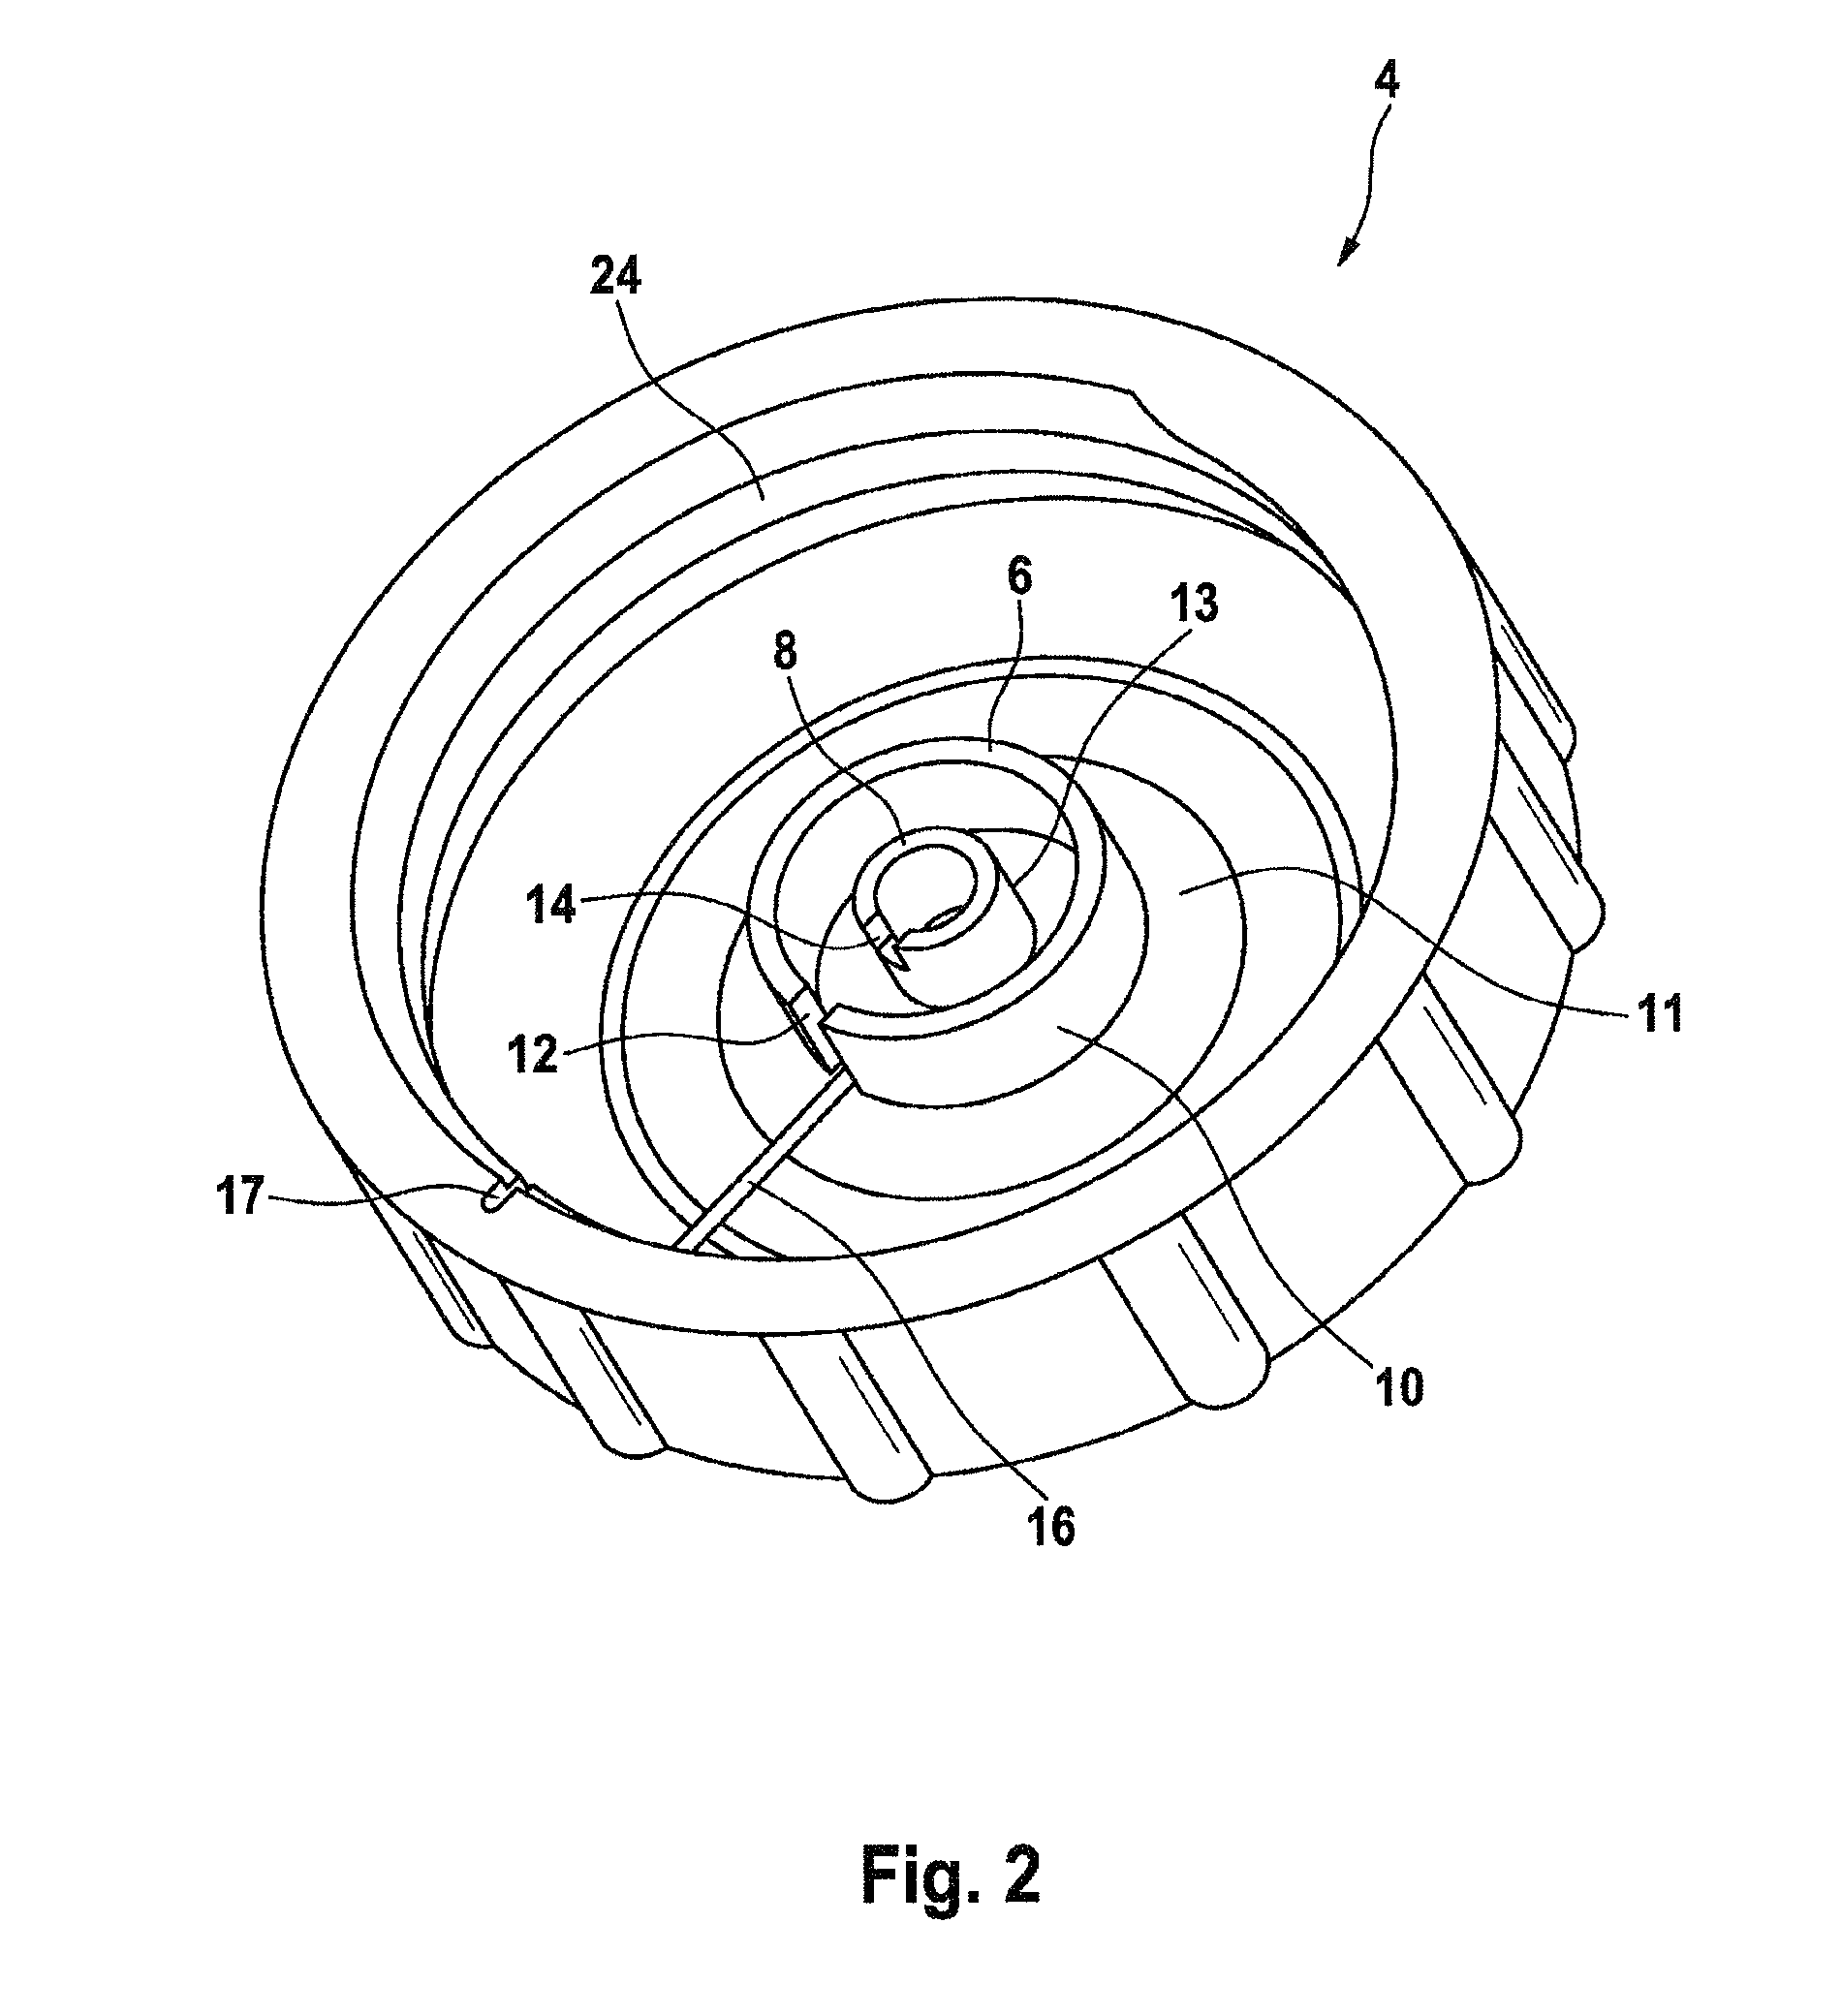 Pressure medium container for a hydraulic motor vehicle brake system